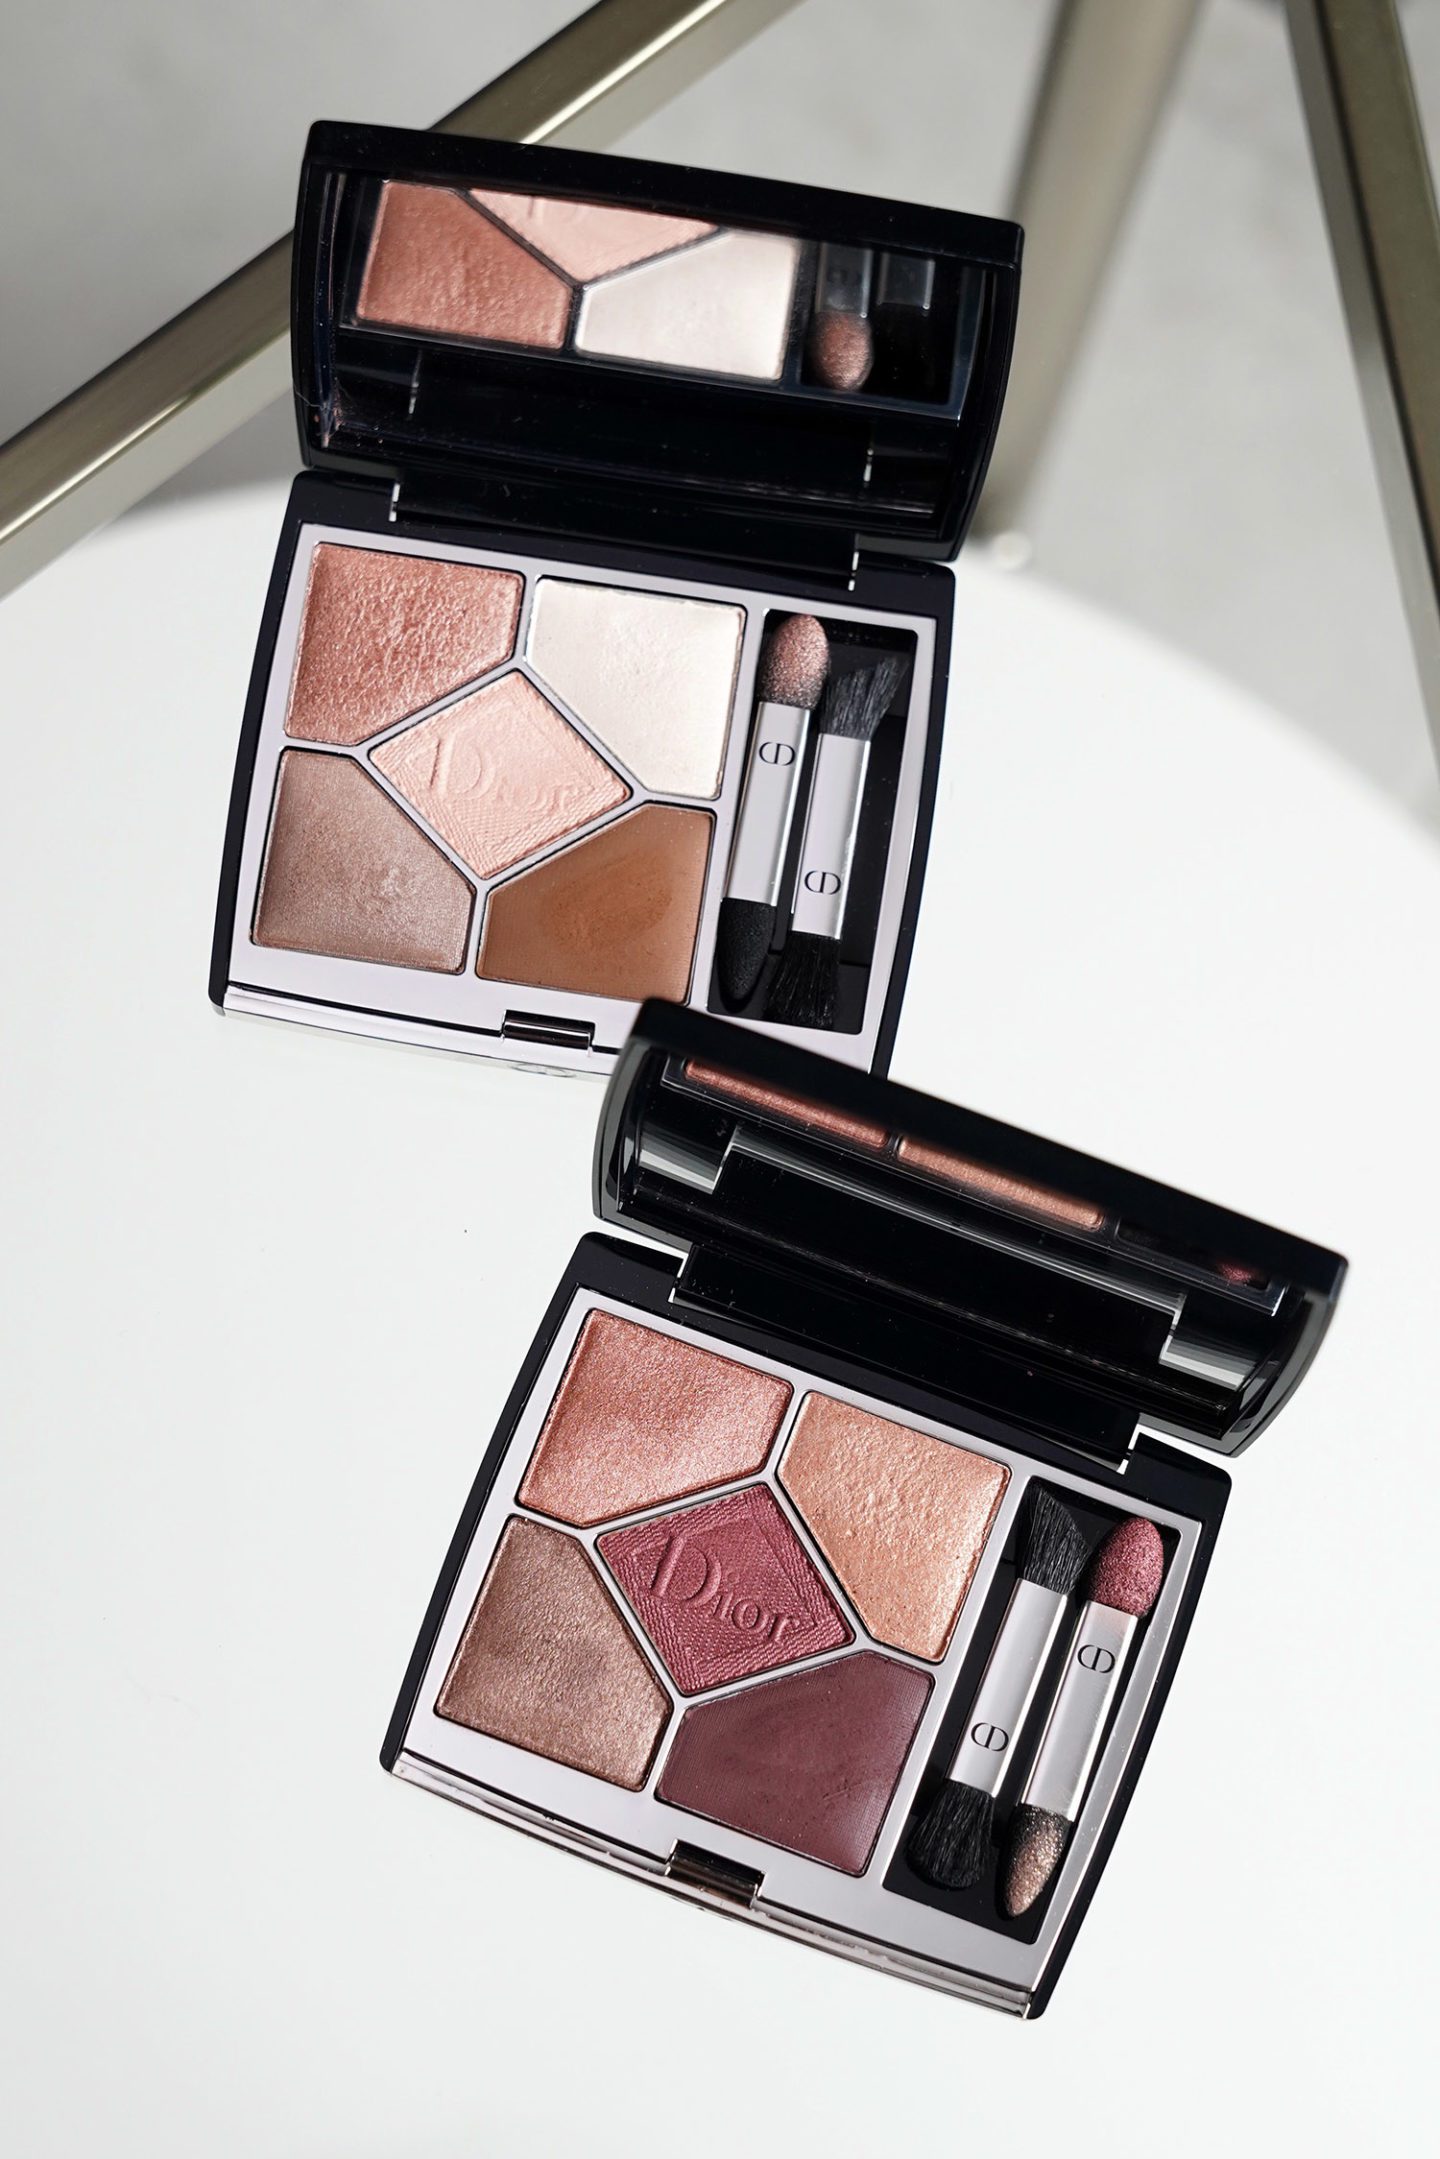 Dior 5 Couleurs Eyeshadows in Nude Dress and Mitzah